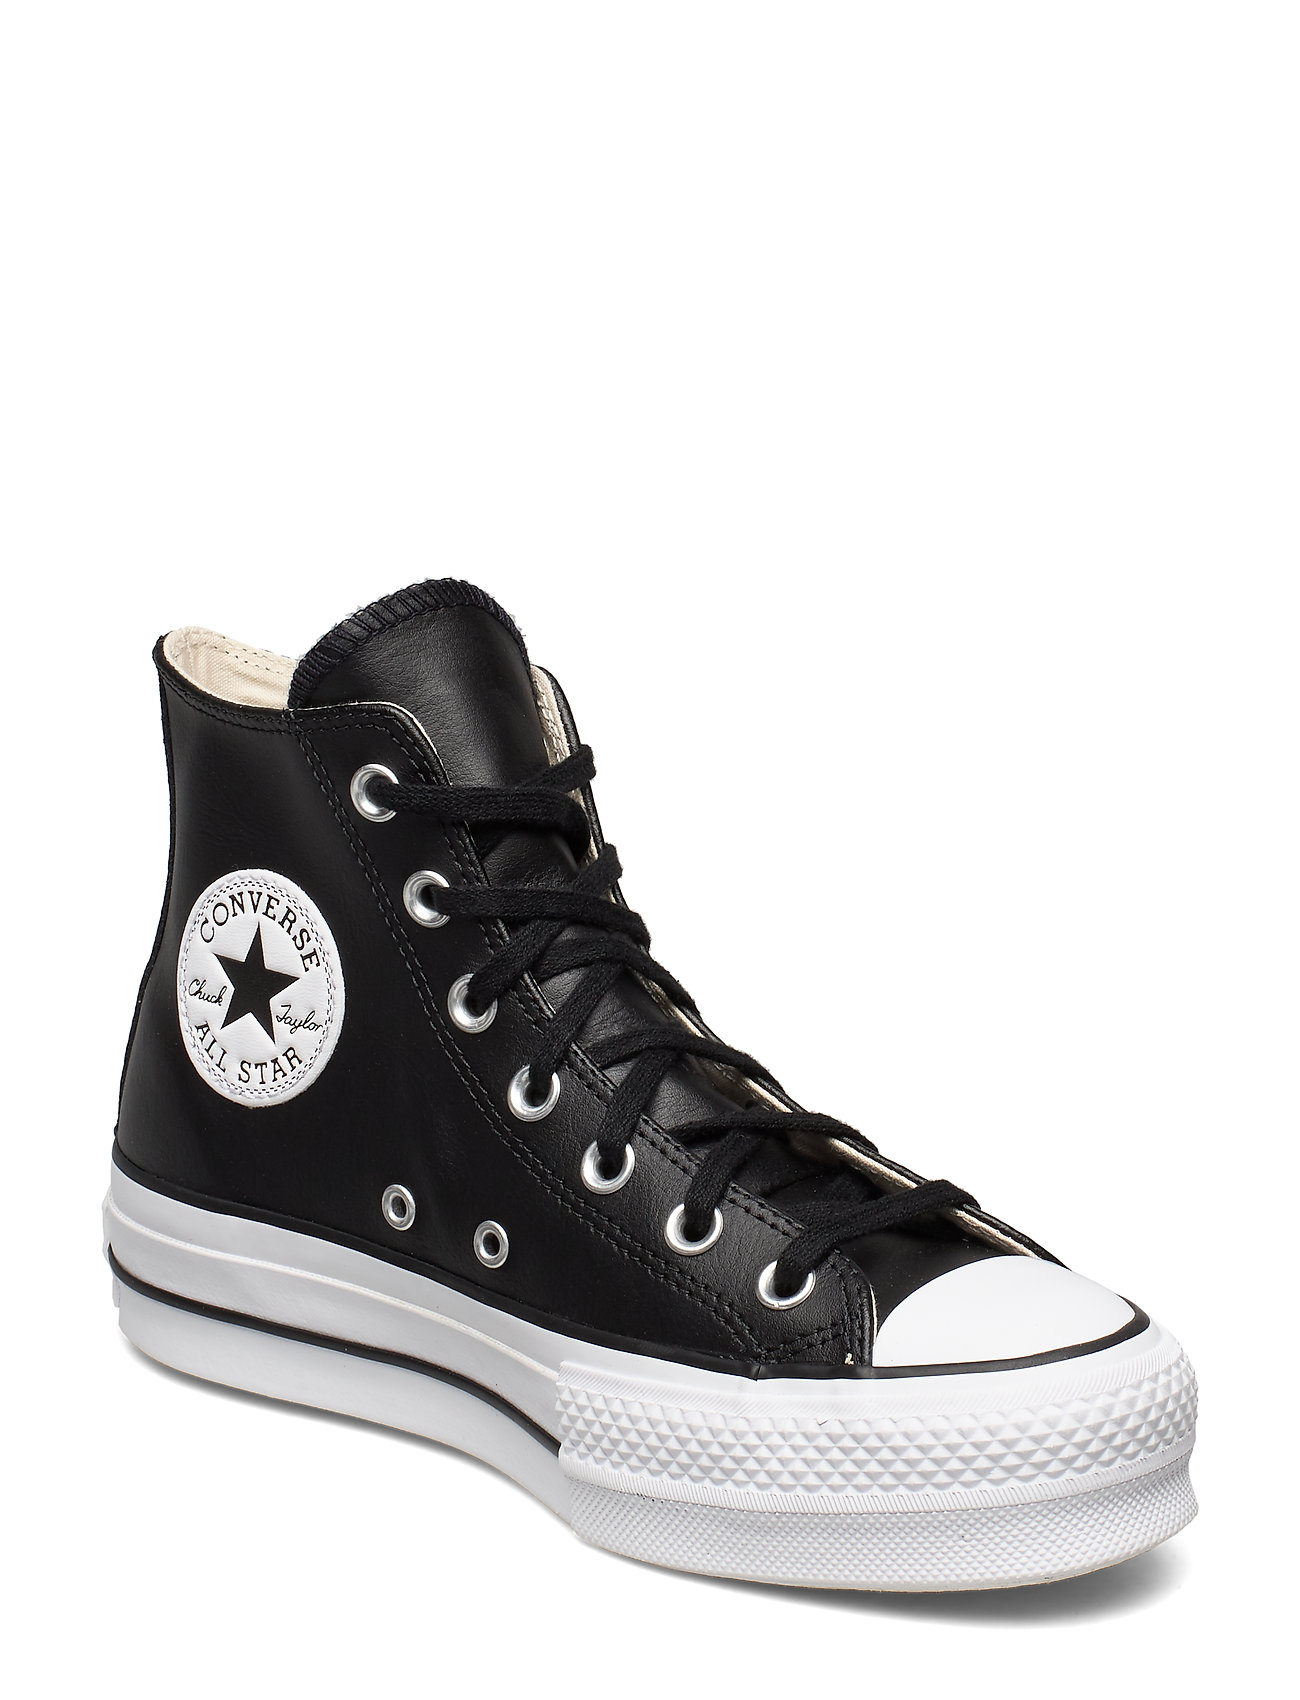 Converse Black And White Leather | enveng.uowm.gr